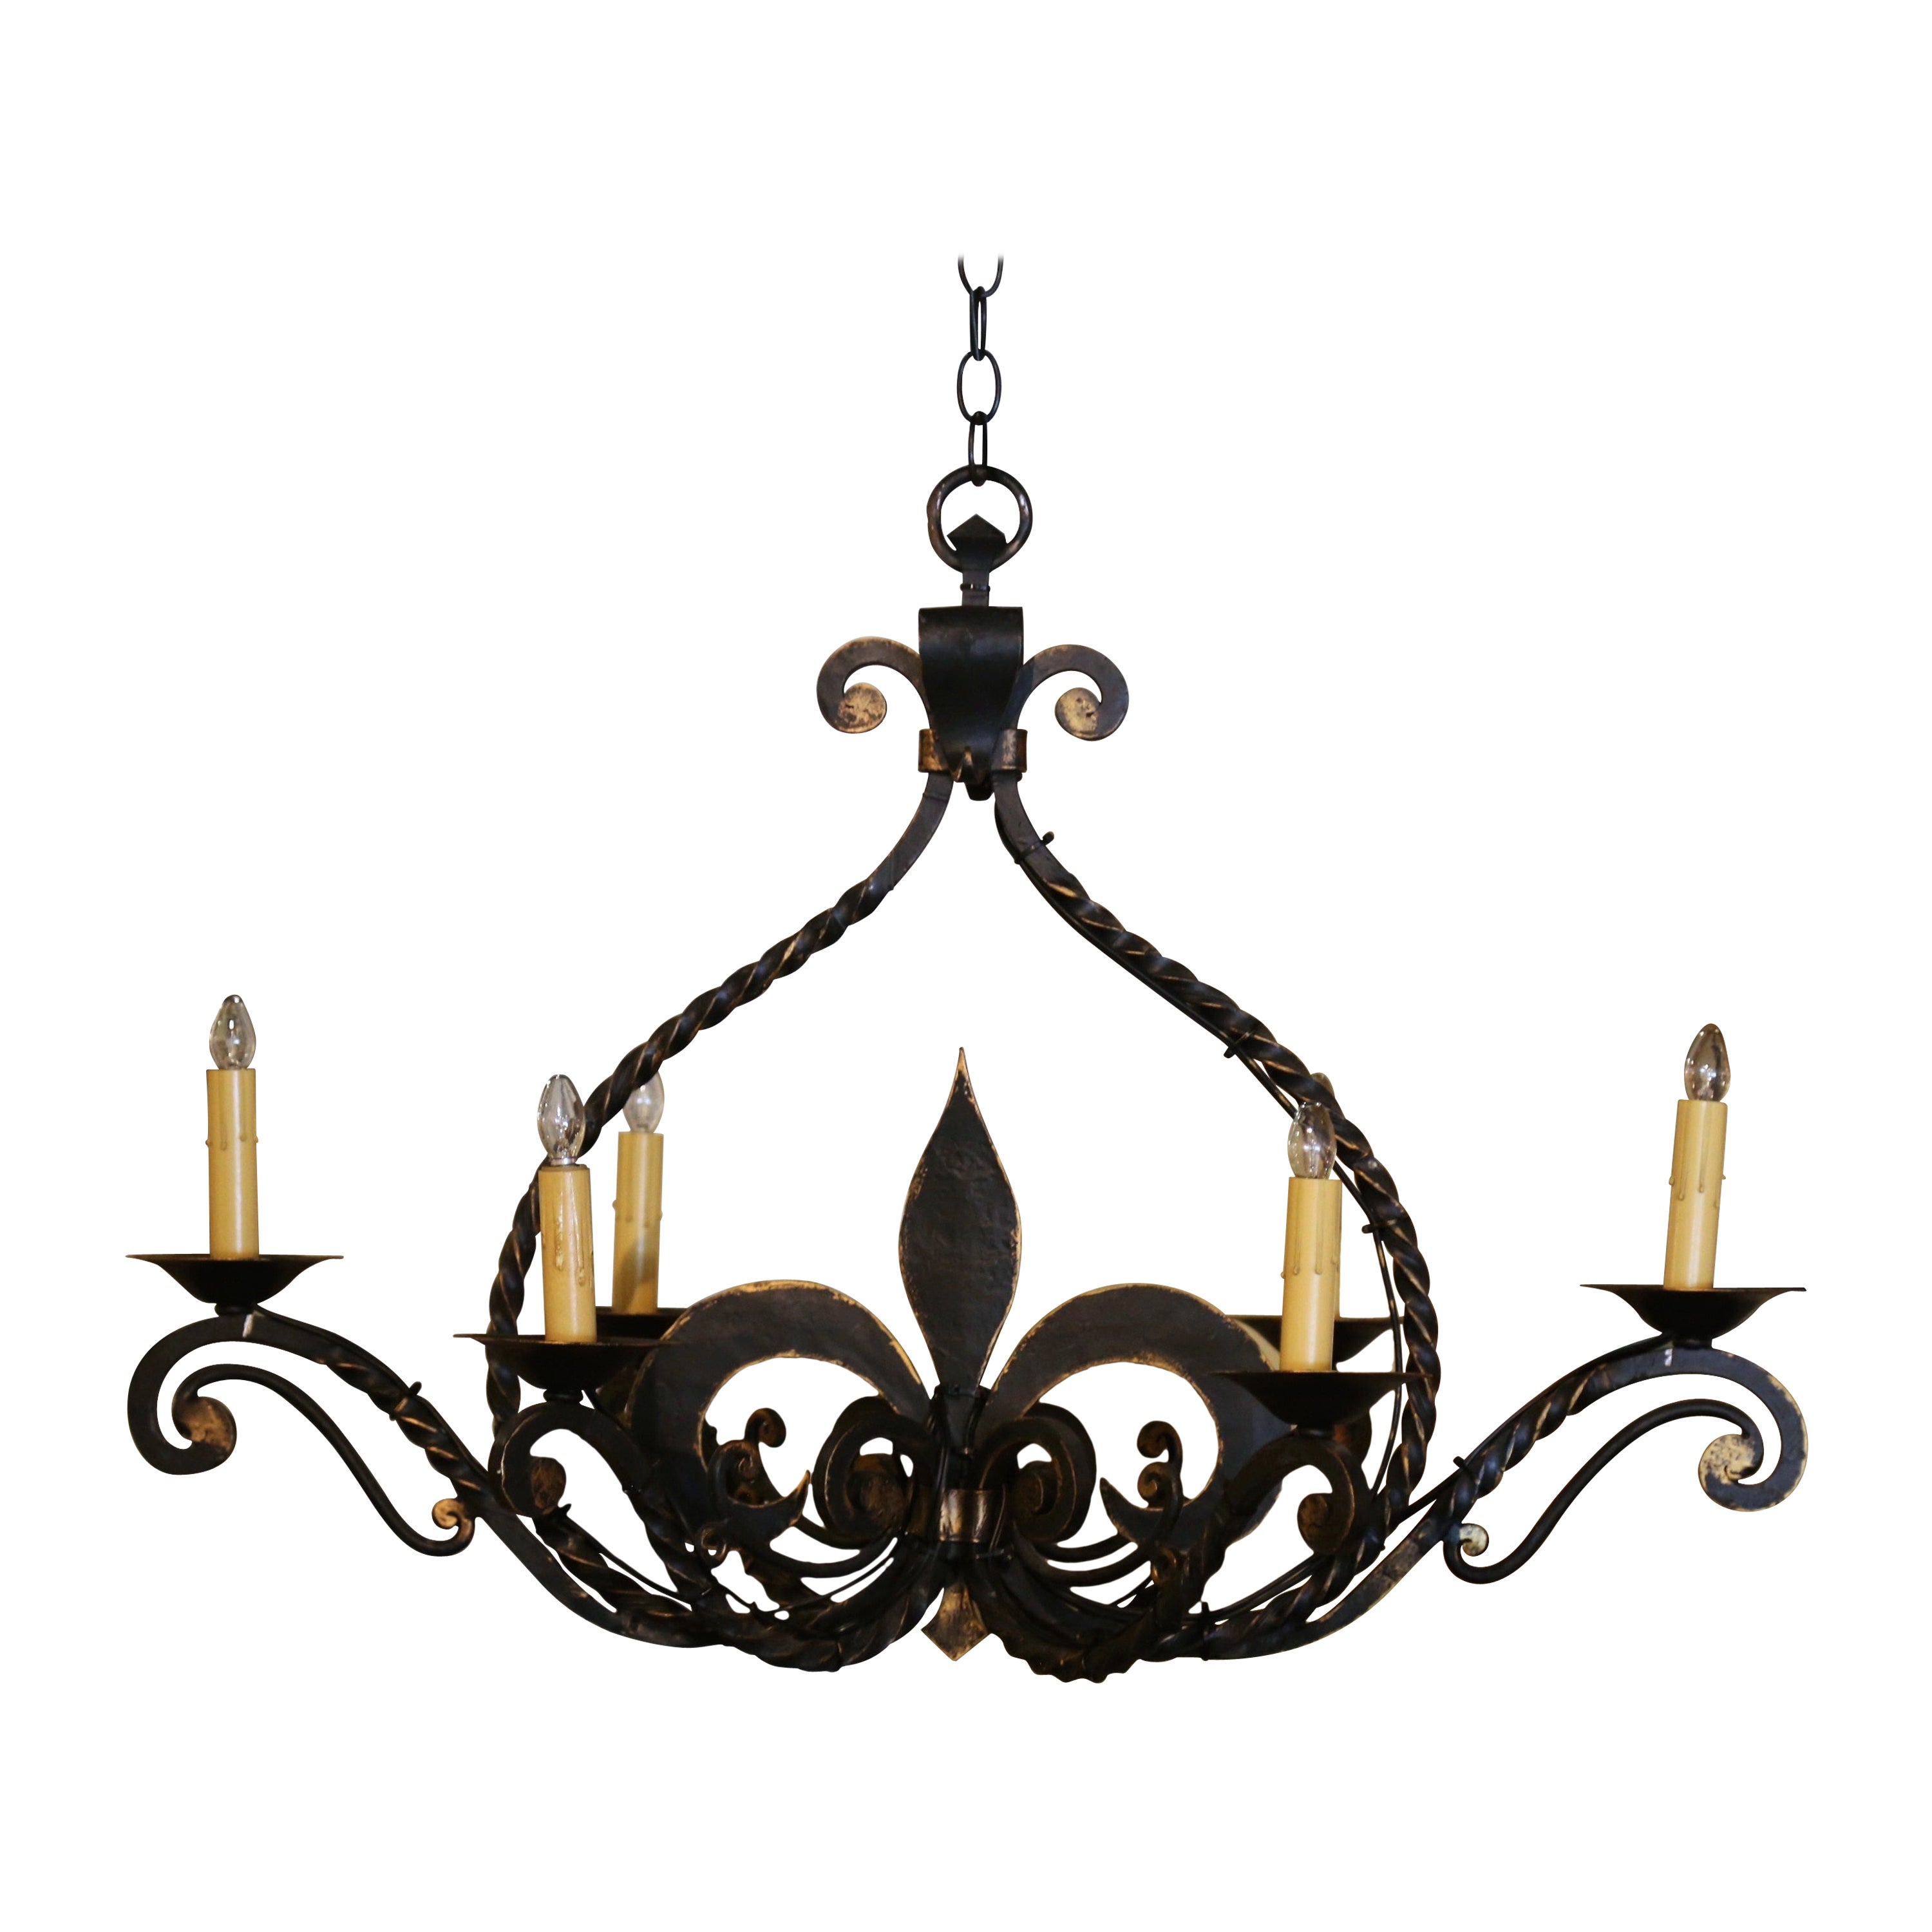  Early 20th Century French Gothic Wrought Iron Six-Light Fleur-de-Lys Chandelier For Sale